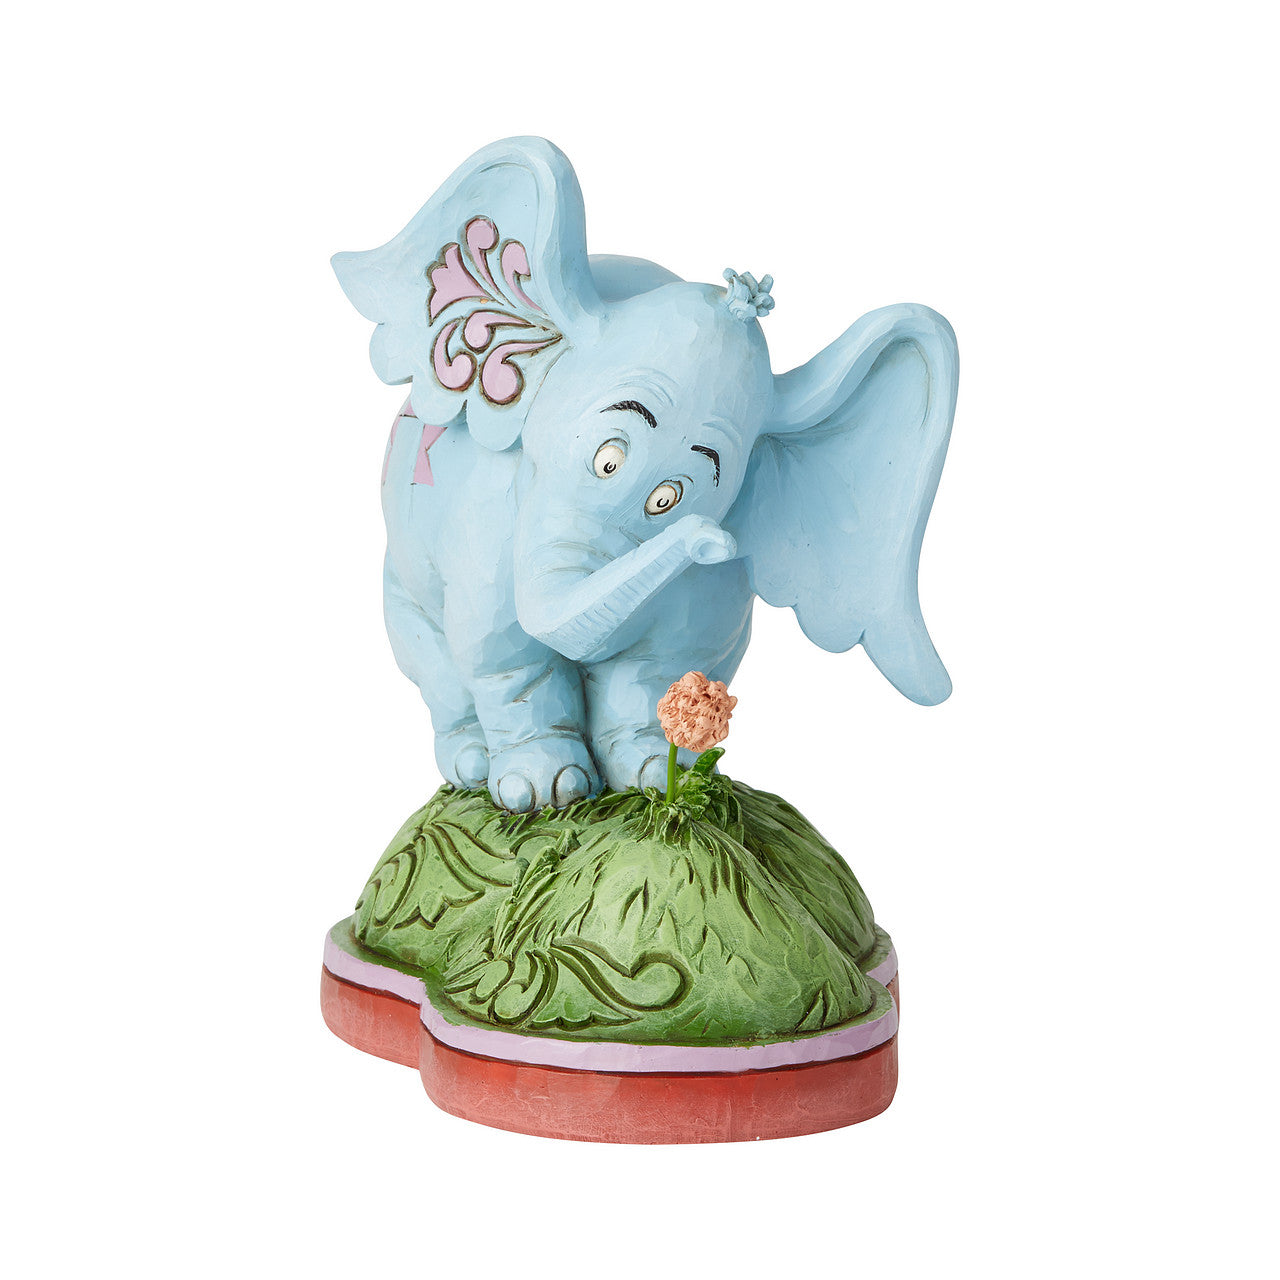 Dr. Seuss Horton Hears A Who Figurine  The mayor of Whoville calls fellow Whos to save their community! In the beloved children's tale Horton Hears a Who, every voice counts in making a difference.